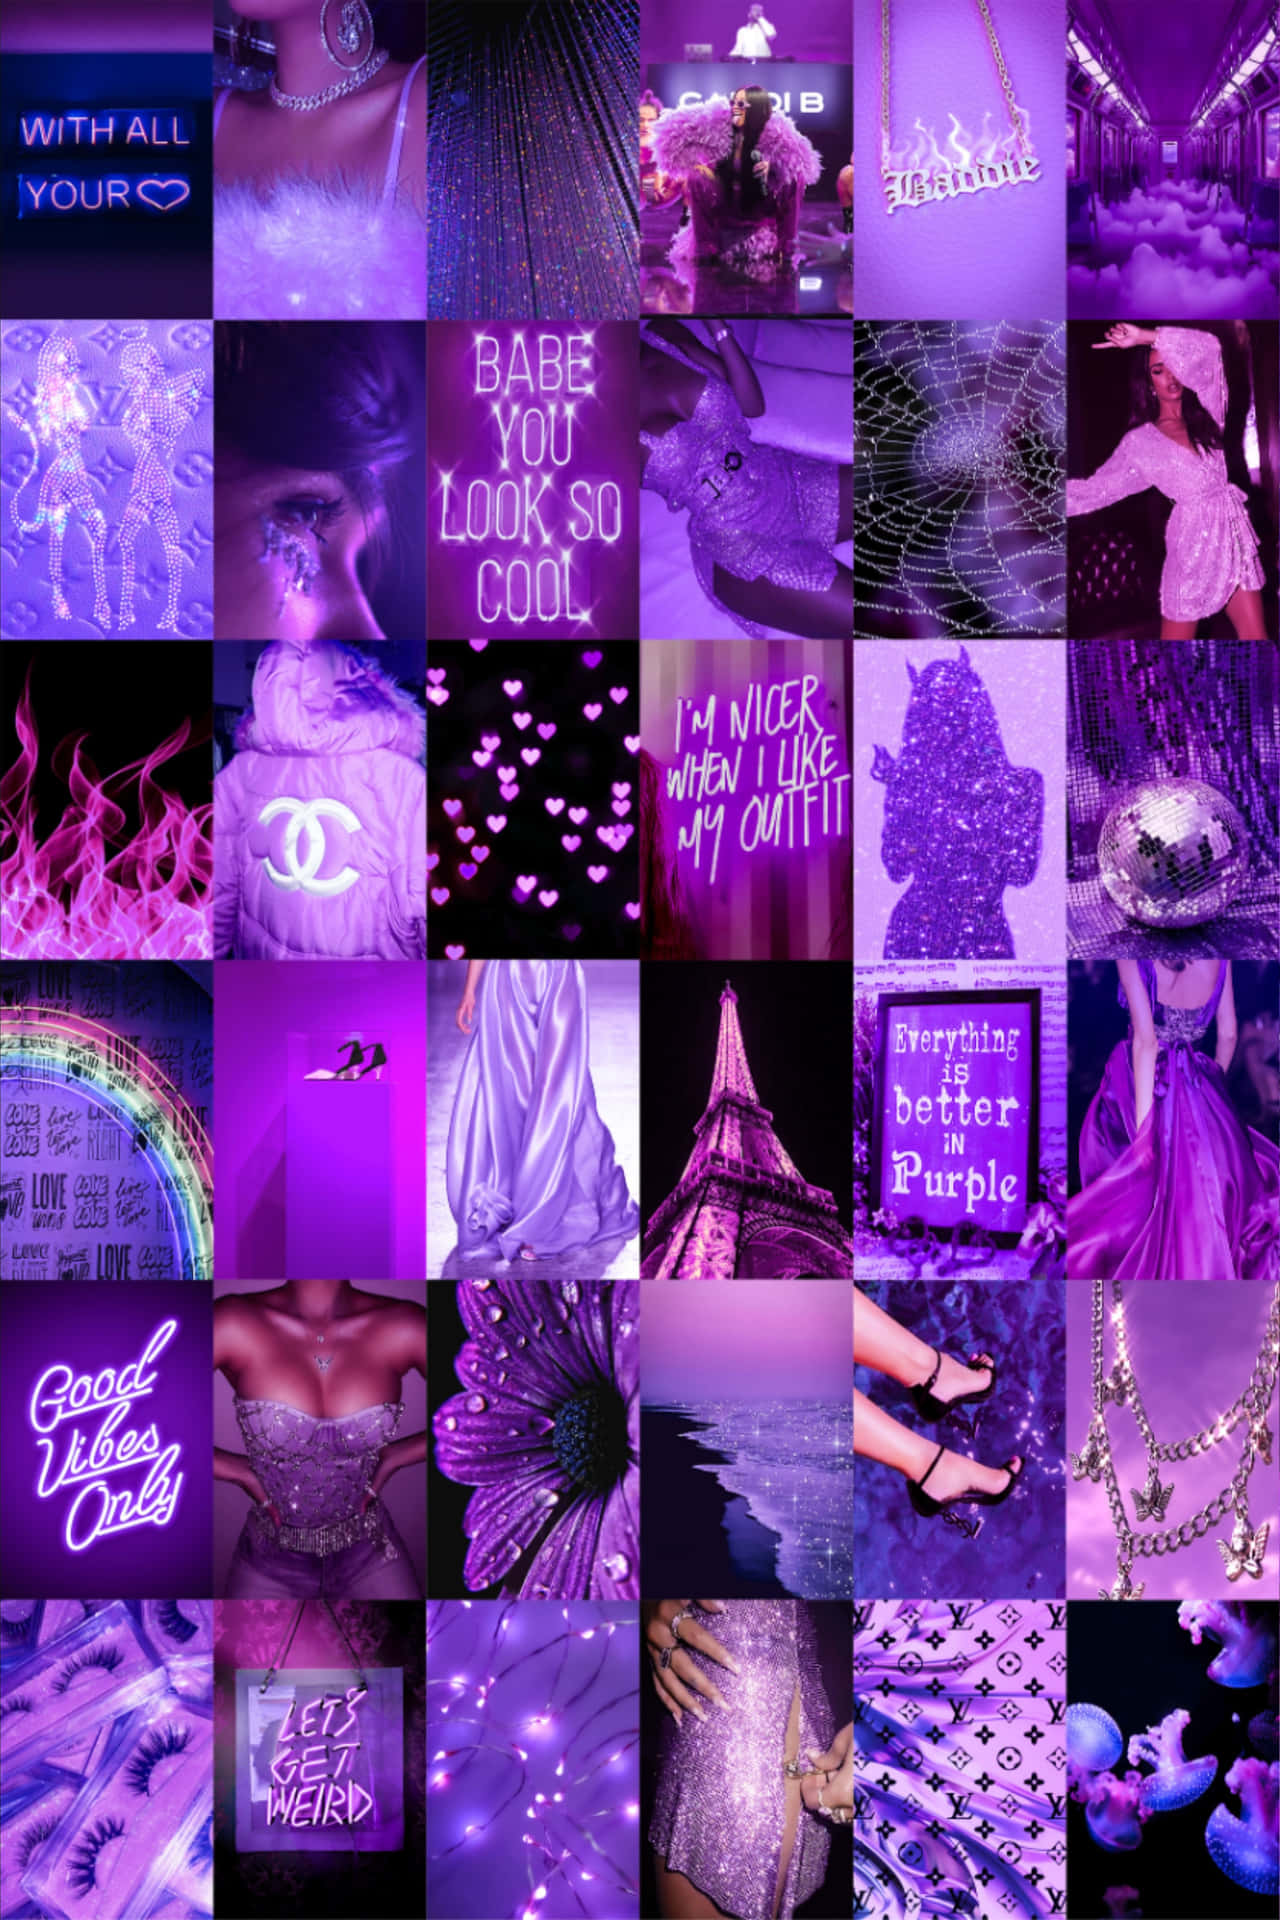 Get dolled up in the latest aesthetic purple baddie style Wallpaper